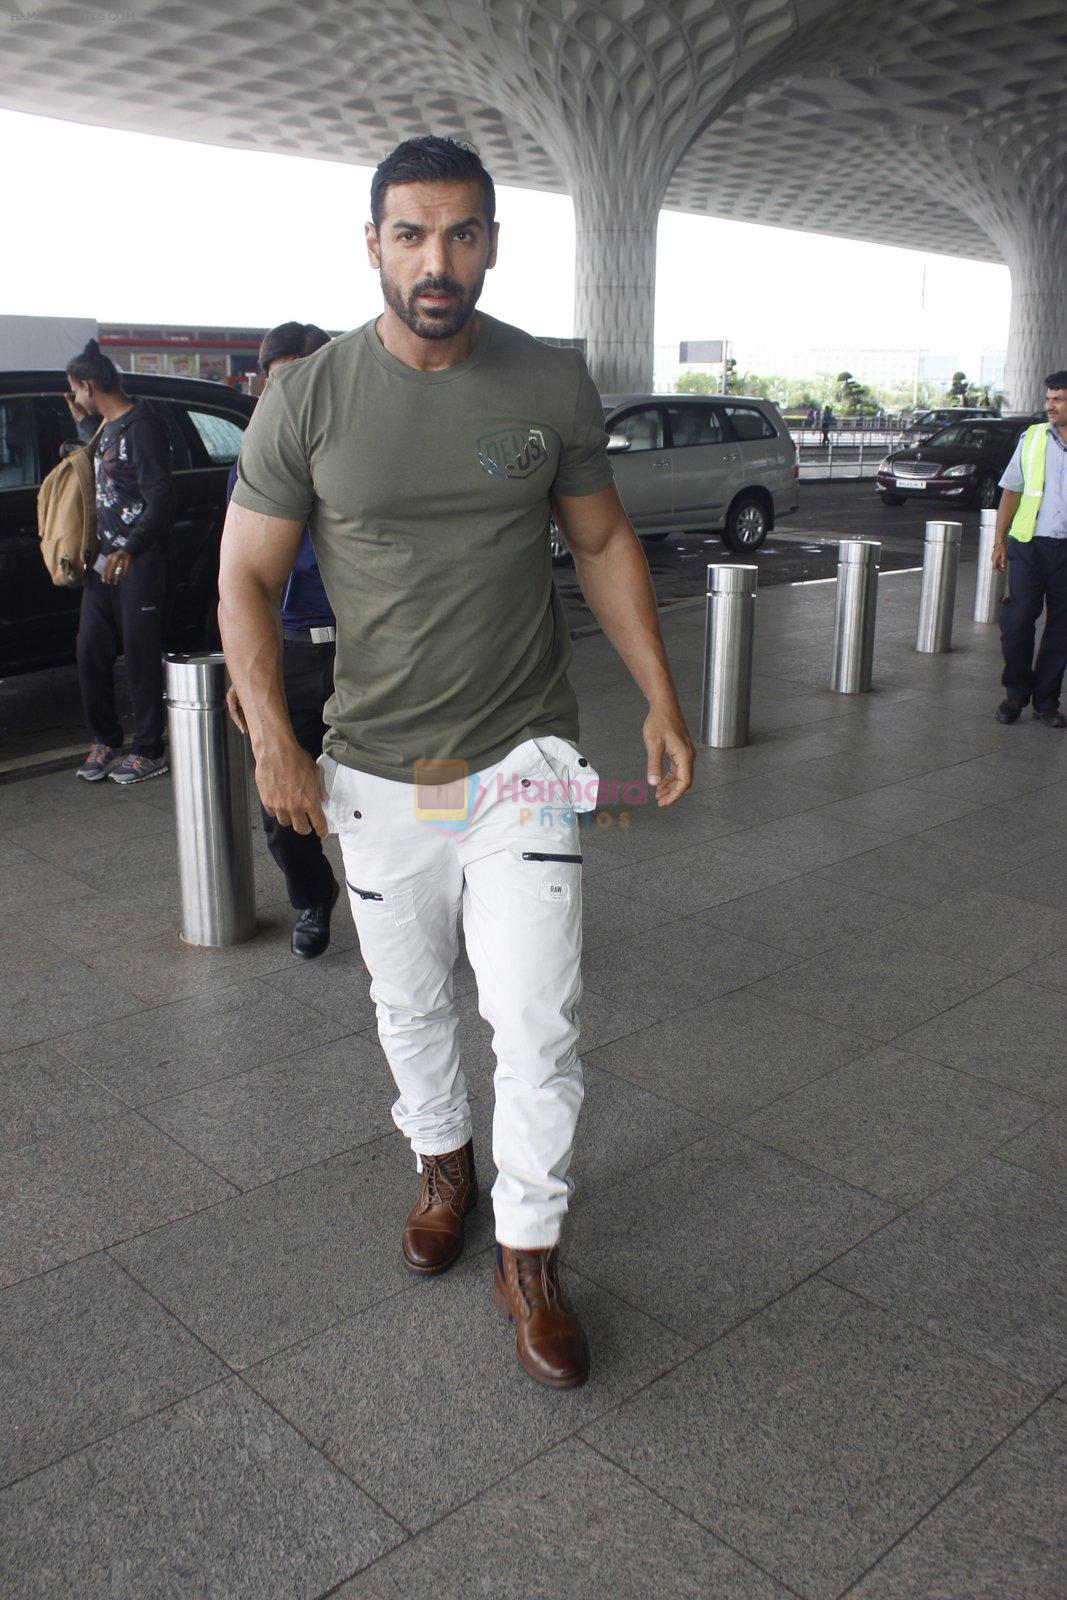 John Abraham at the airport on June 24, 2016